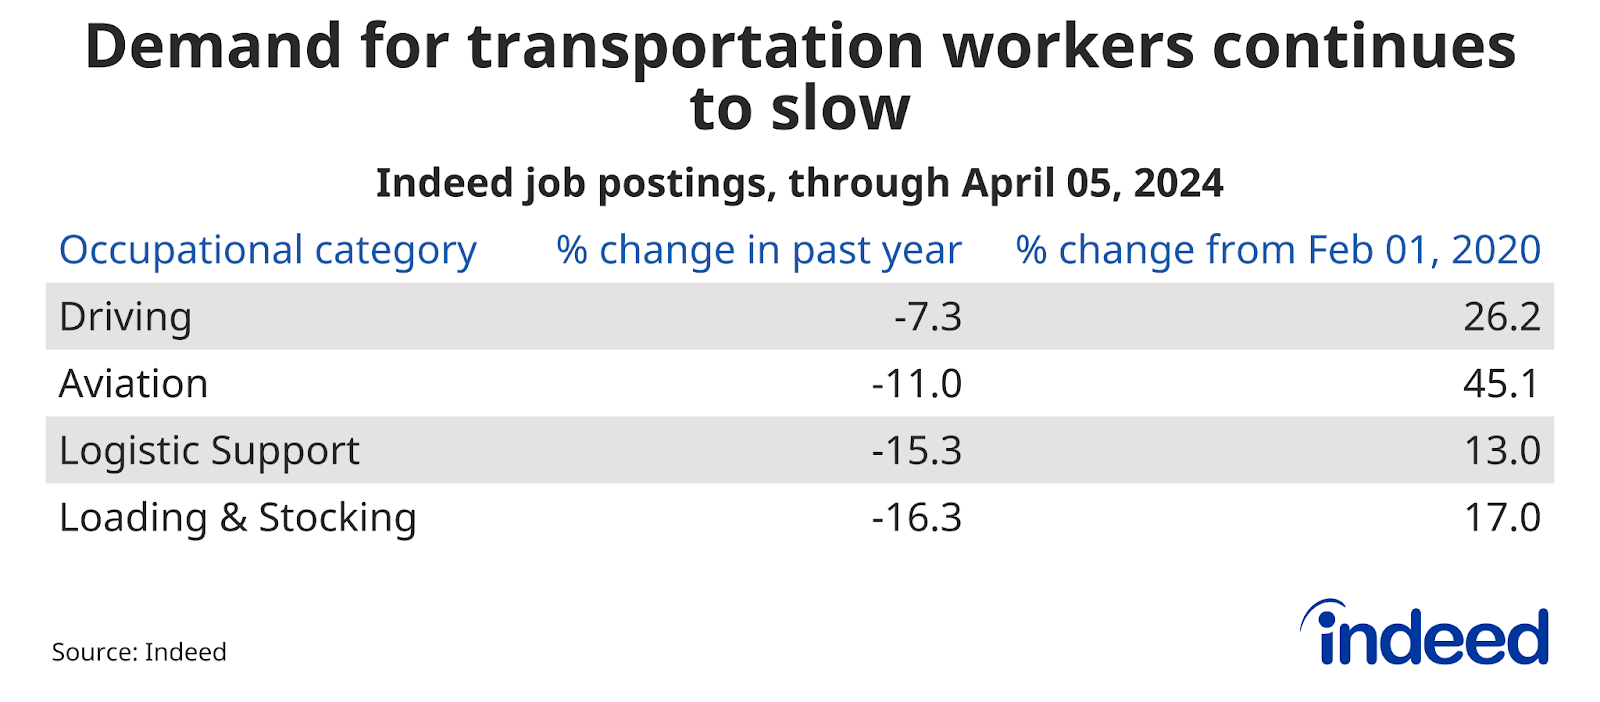 Table showing job posting trends, over the past year through April 5, 2024, and from the pre-pandemic baseline, for several Transportation occupations. Driving job postings decreased 7.3% over the past year but remained up just over 26% from their pre-pandemic baseline.